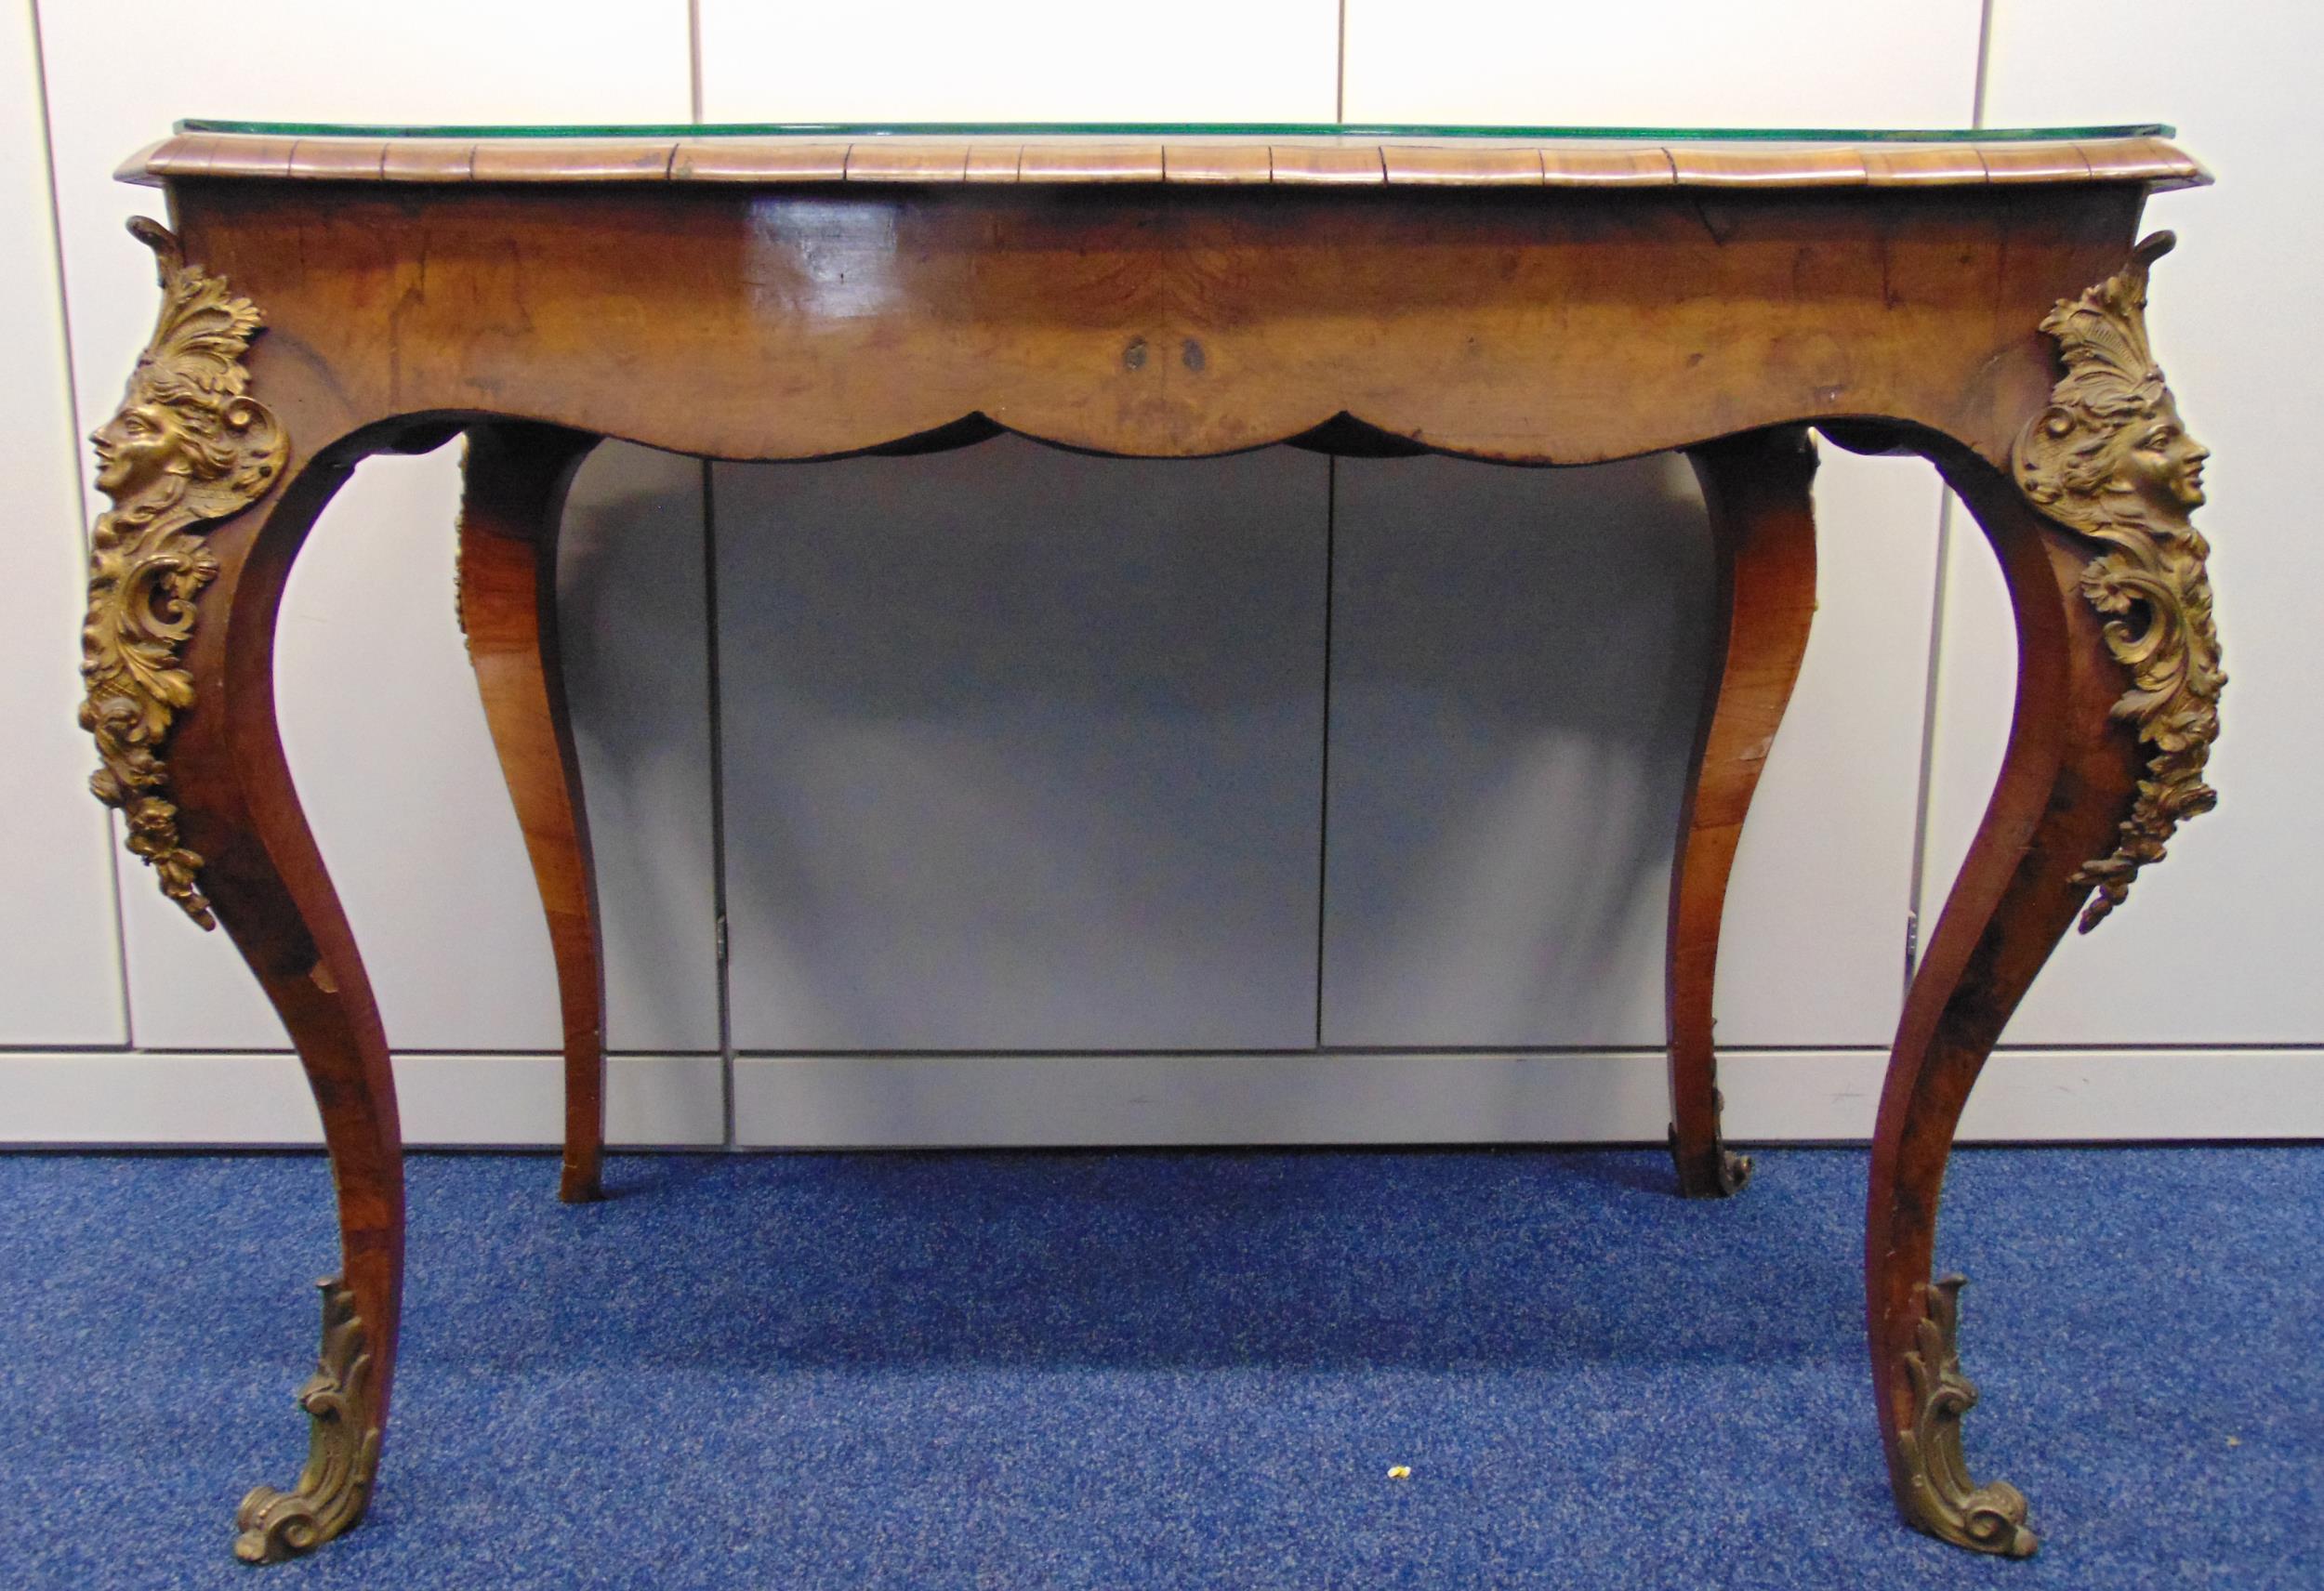 A French 19th century rectangular mahogany hall table with inset fabric and glass top on cabriole